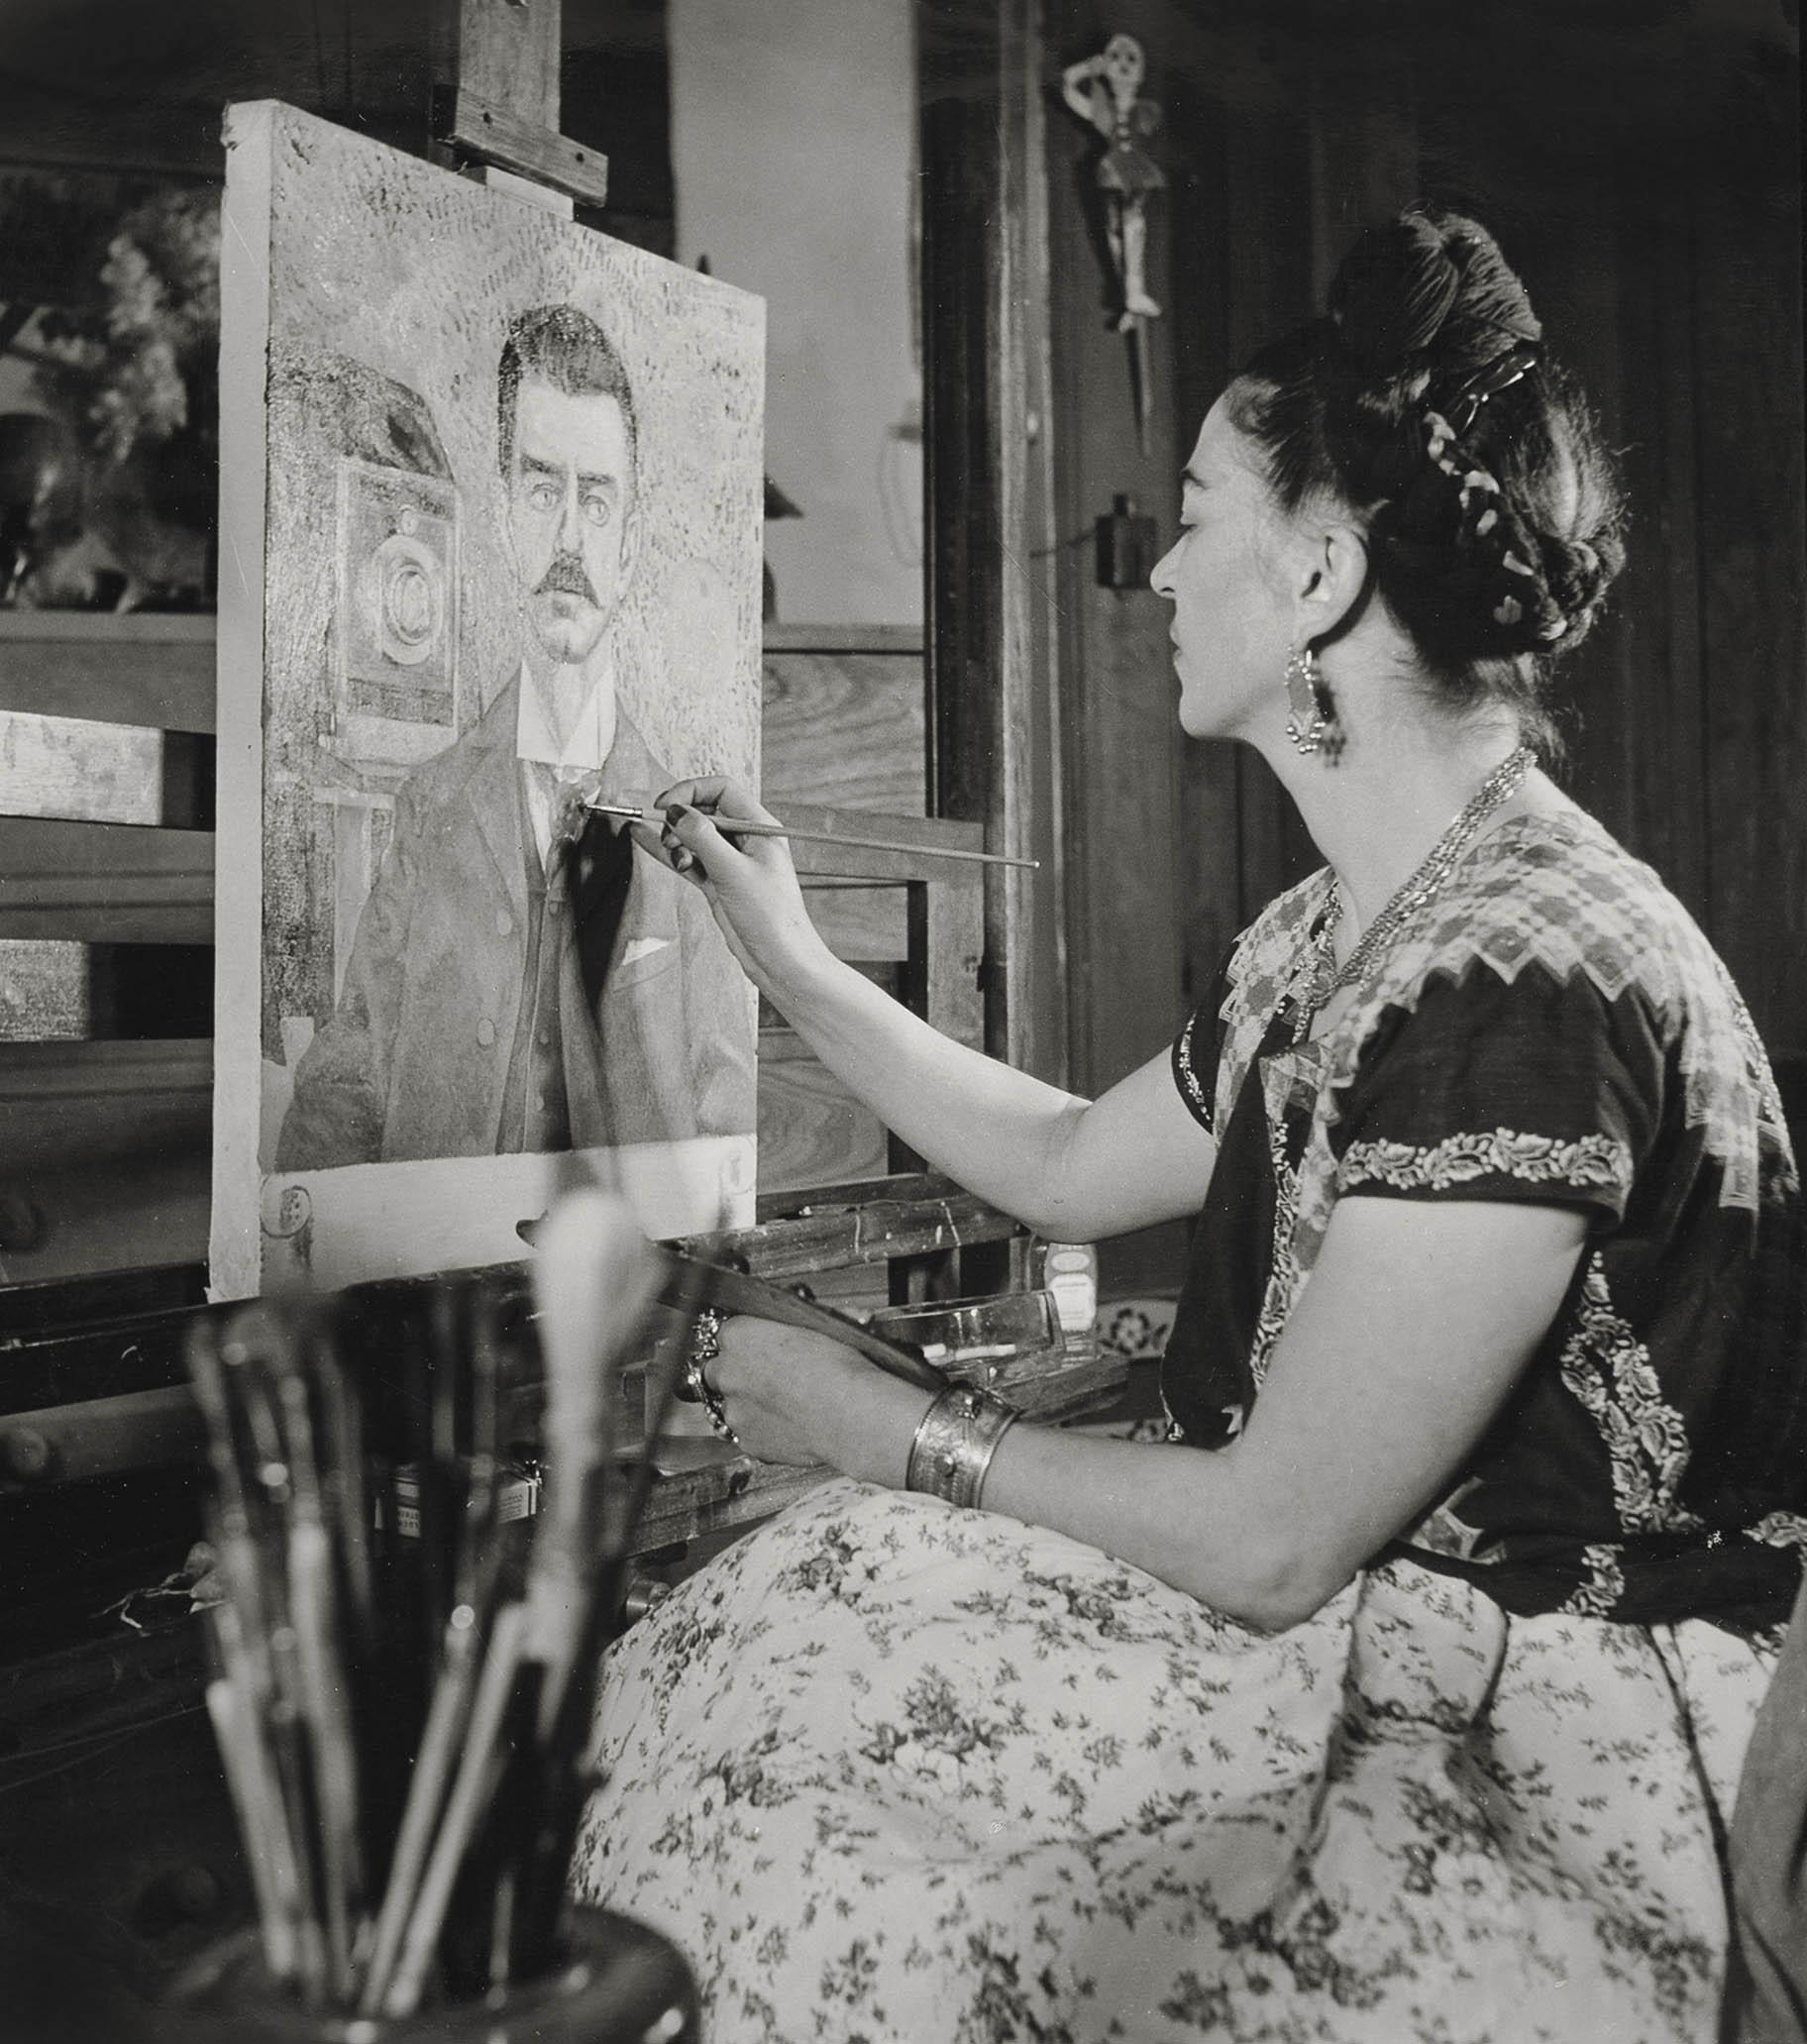 “Frida painting the portrait of her father,” by Gisèle Freund, 1951. (Courtesy of Frida Kahlo & Diego Rivera Archives. Bank of Mexico, Fiduciary in the Diego Rivera and Frida Kahlo Museum Trust).